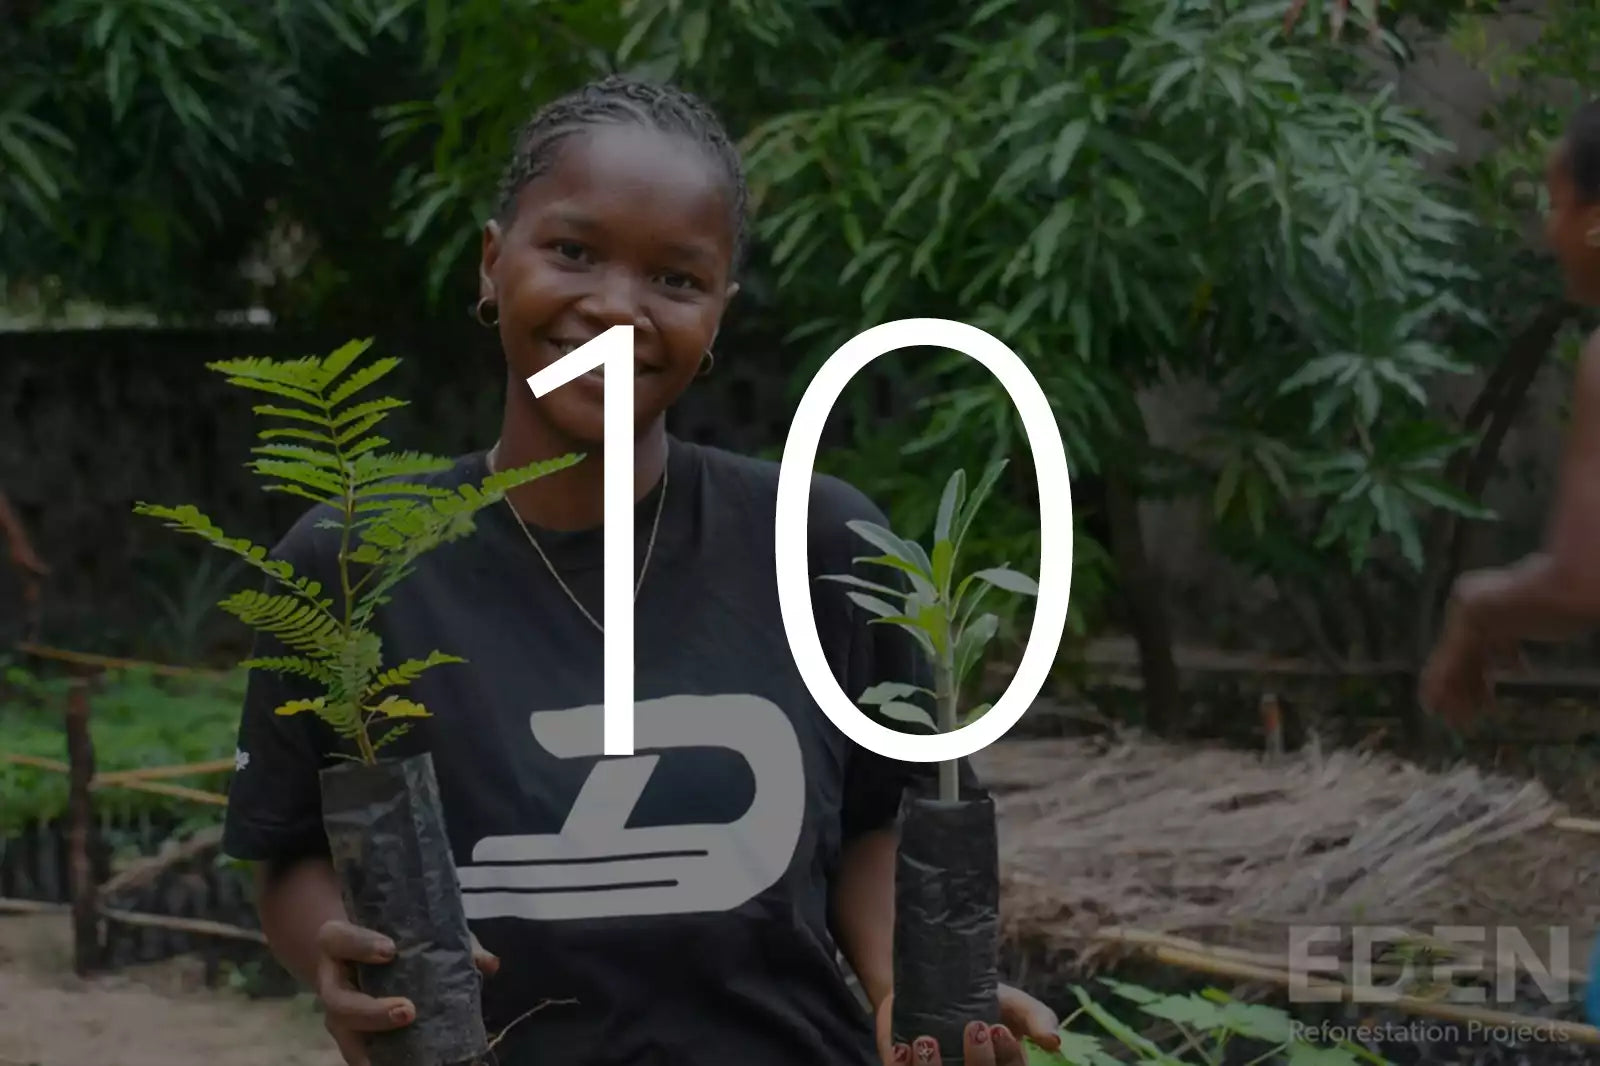 Plant 10 Trees With Eden Reforestation Projects